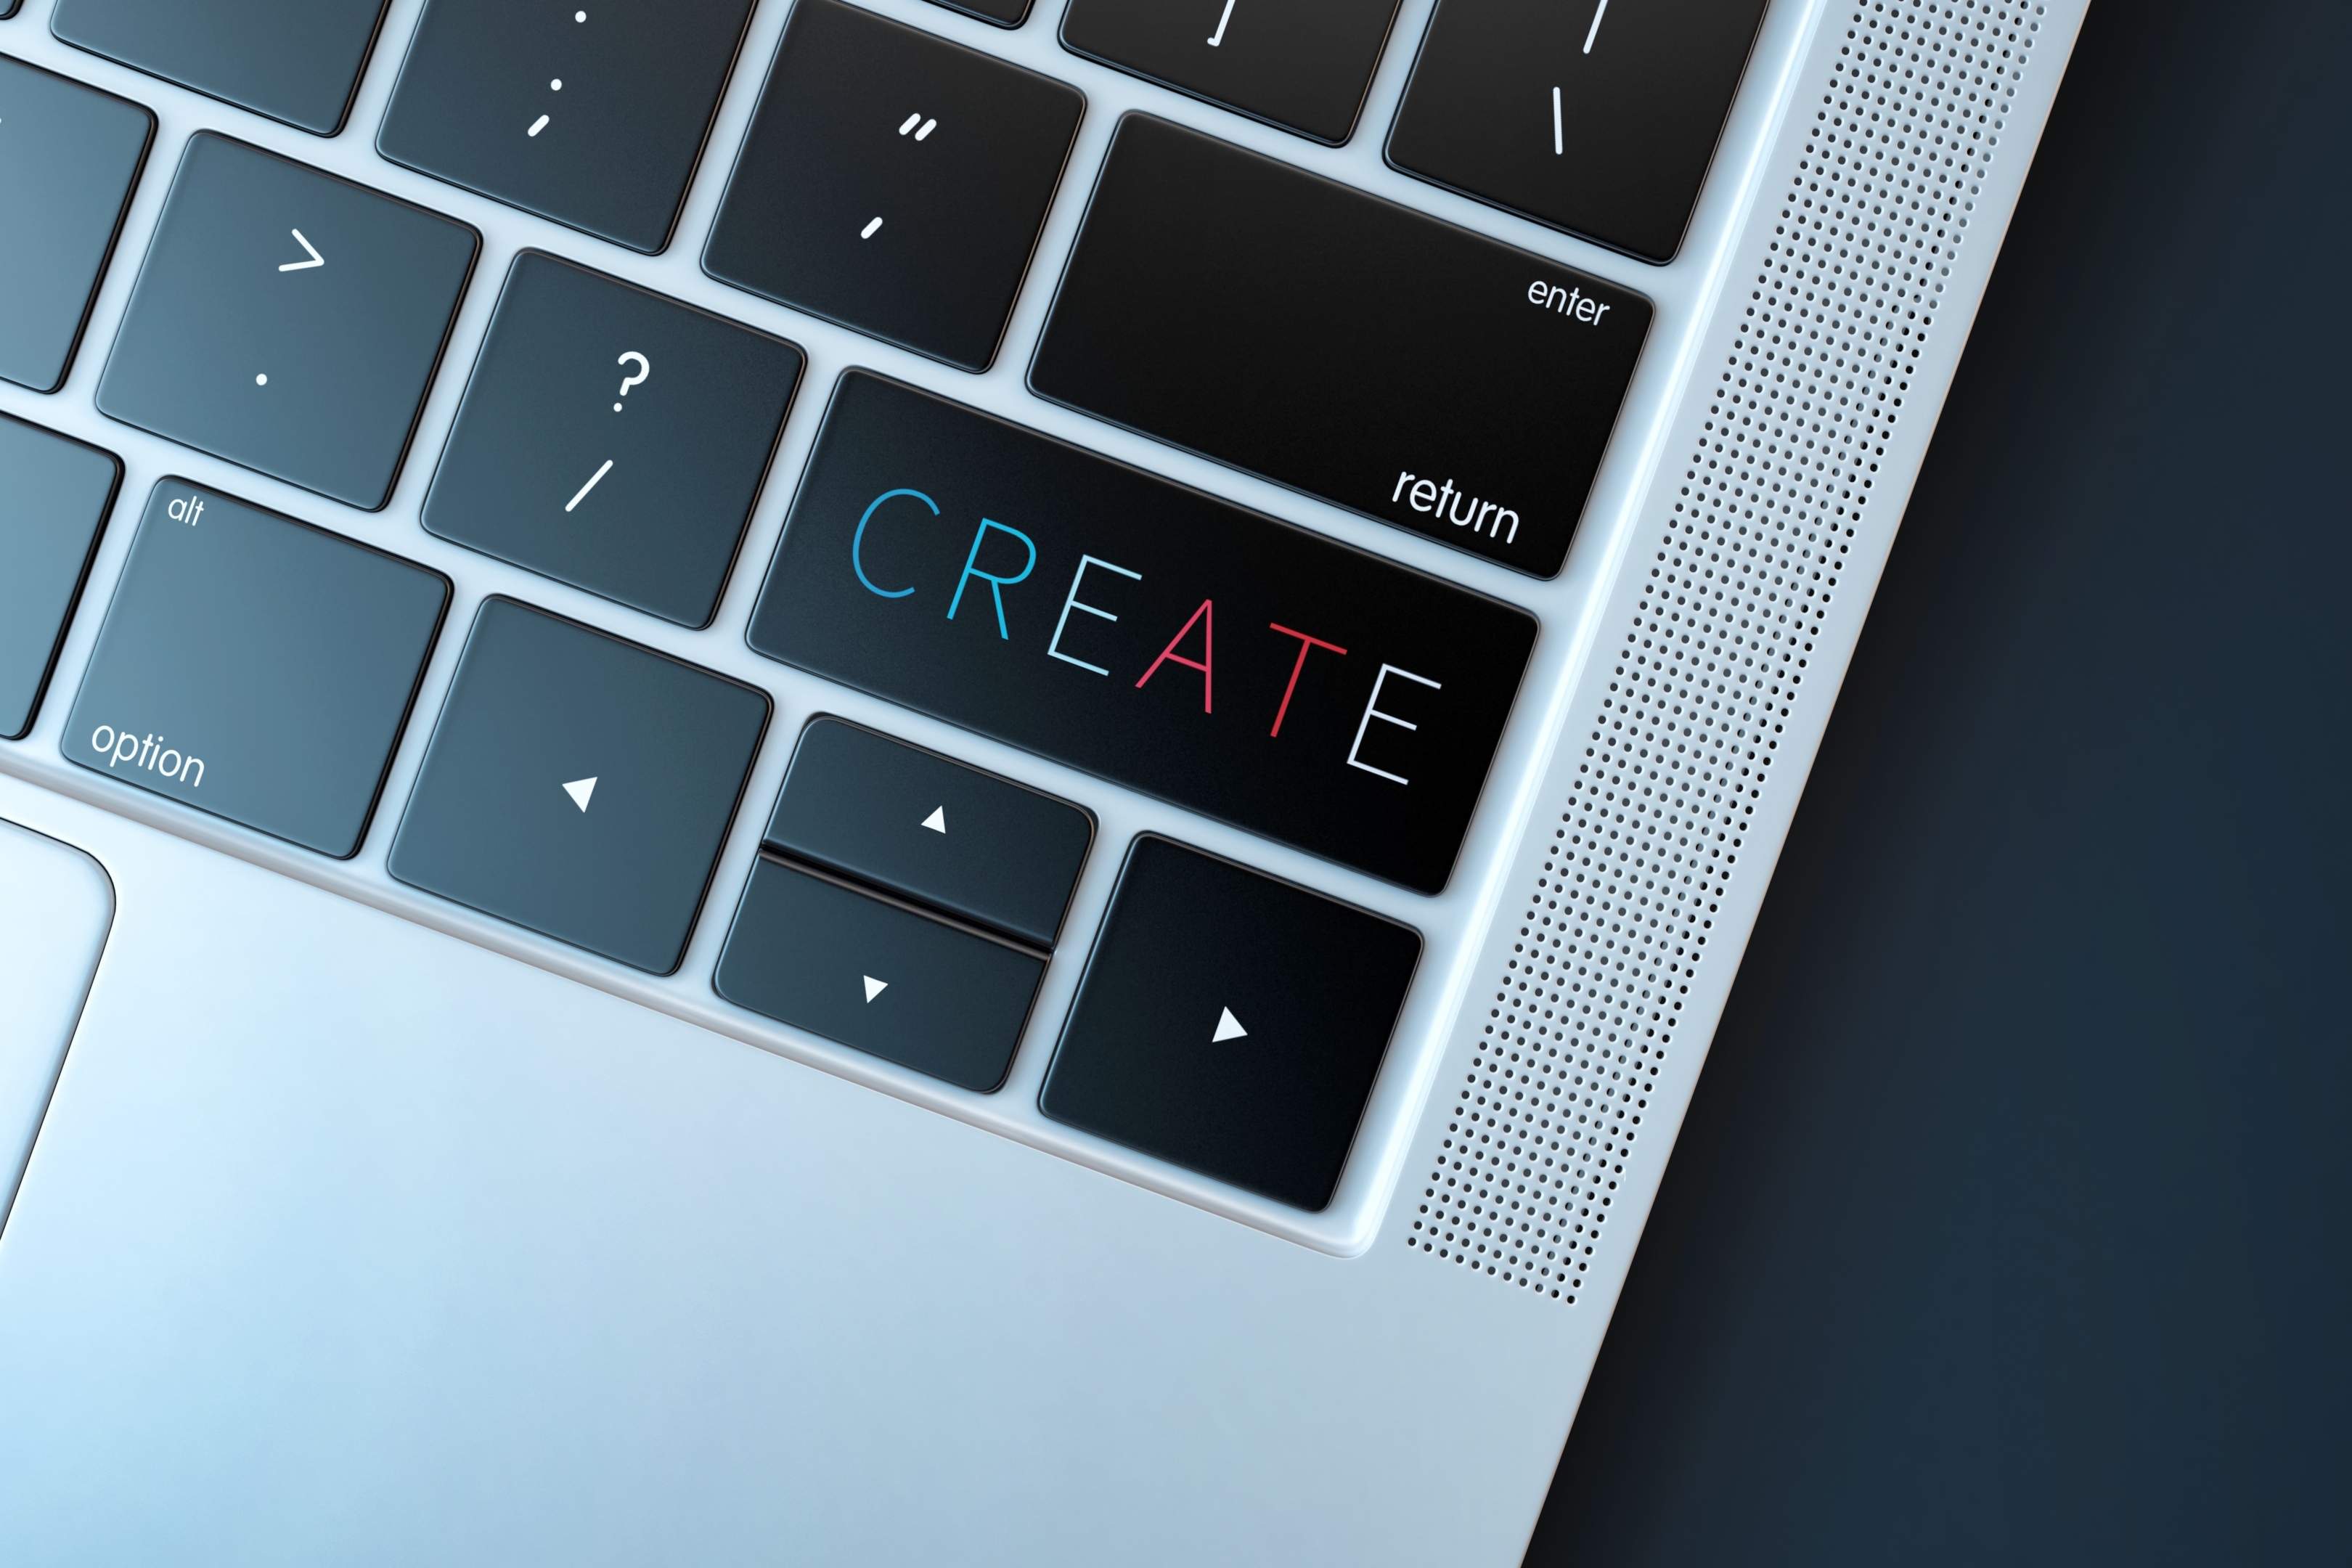 A close up image of the front right hand corner of a laptop keyboard with the word create on the shift key.